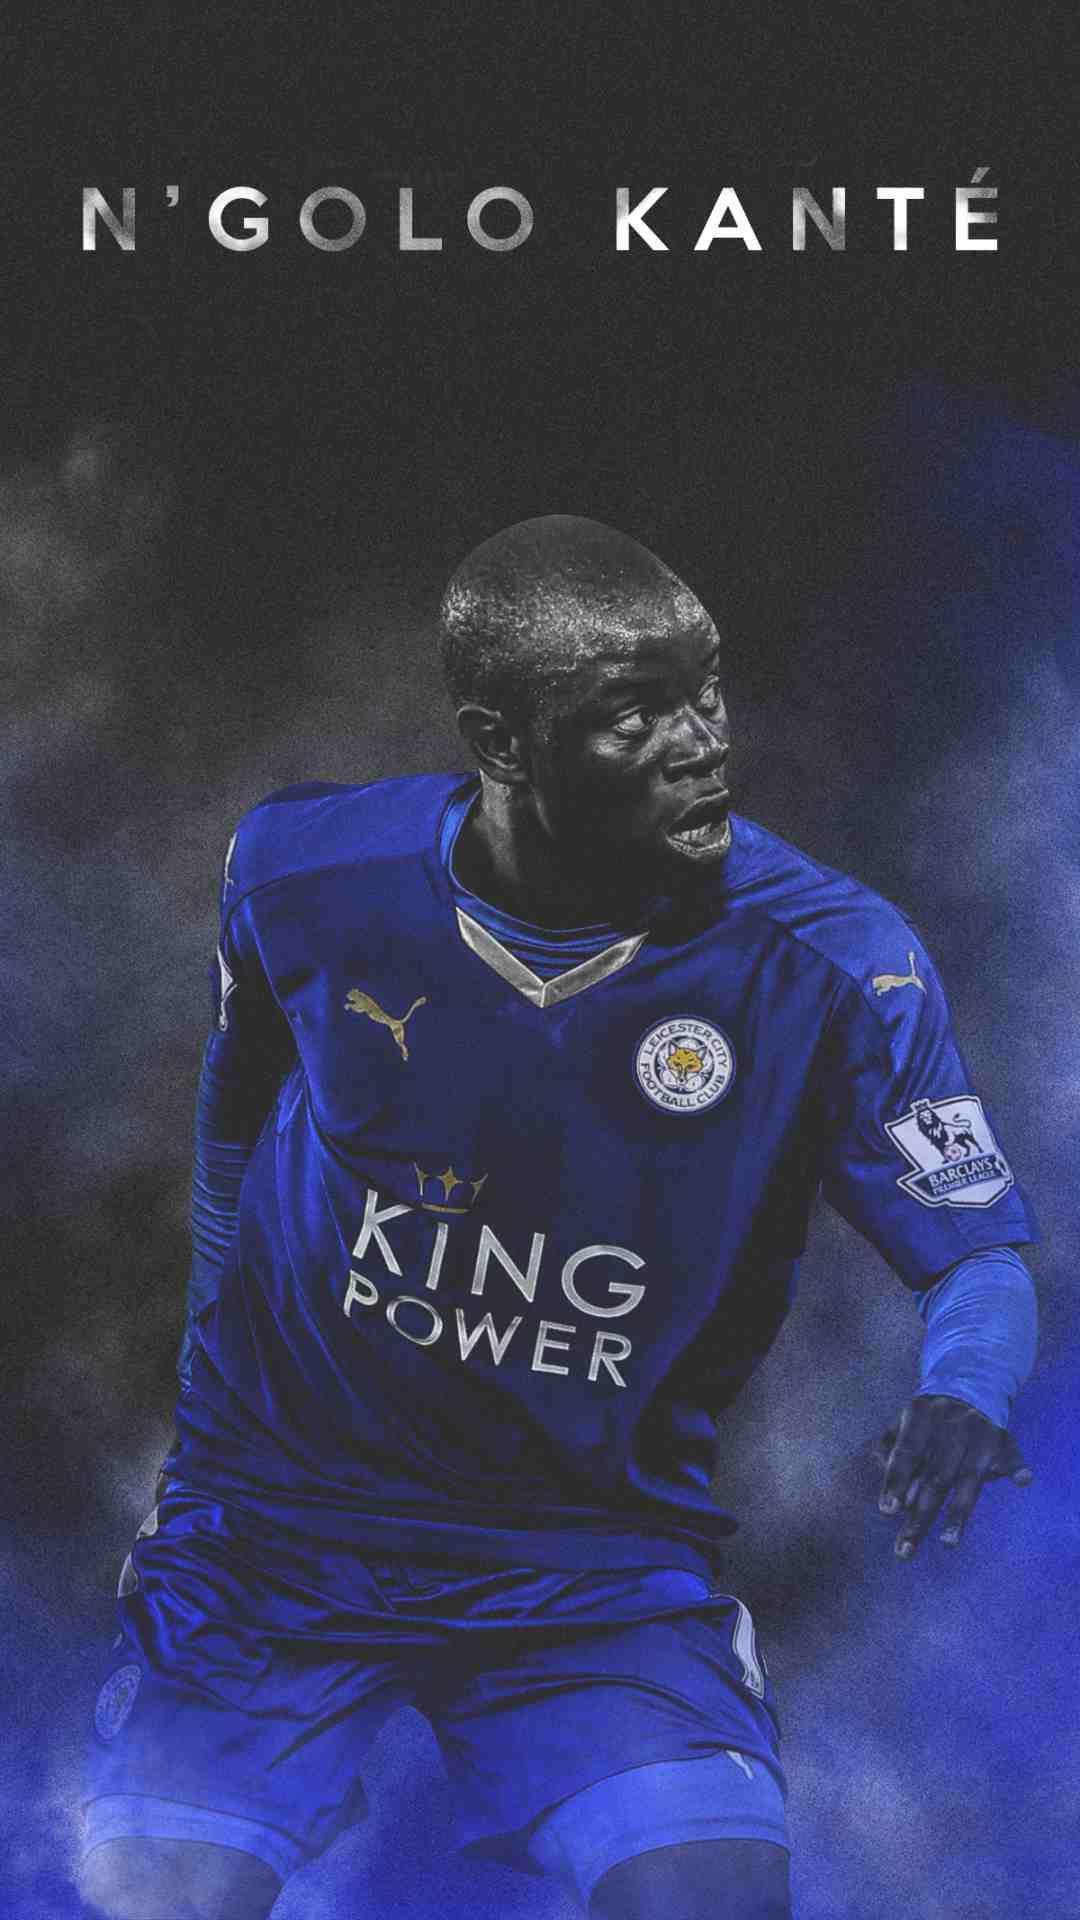 N Golo Kante Wallpaper HD For Android Apk